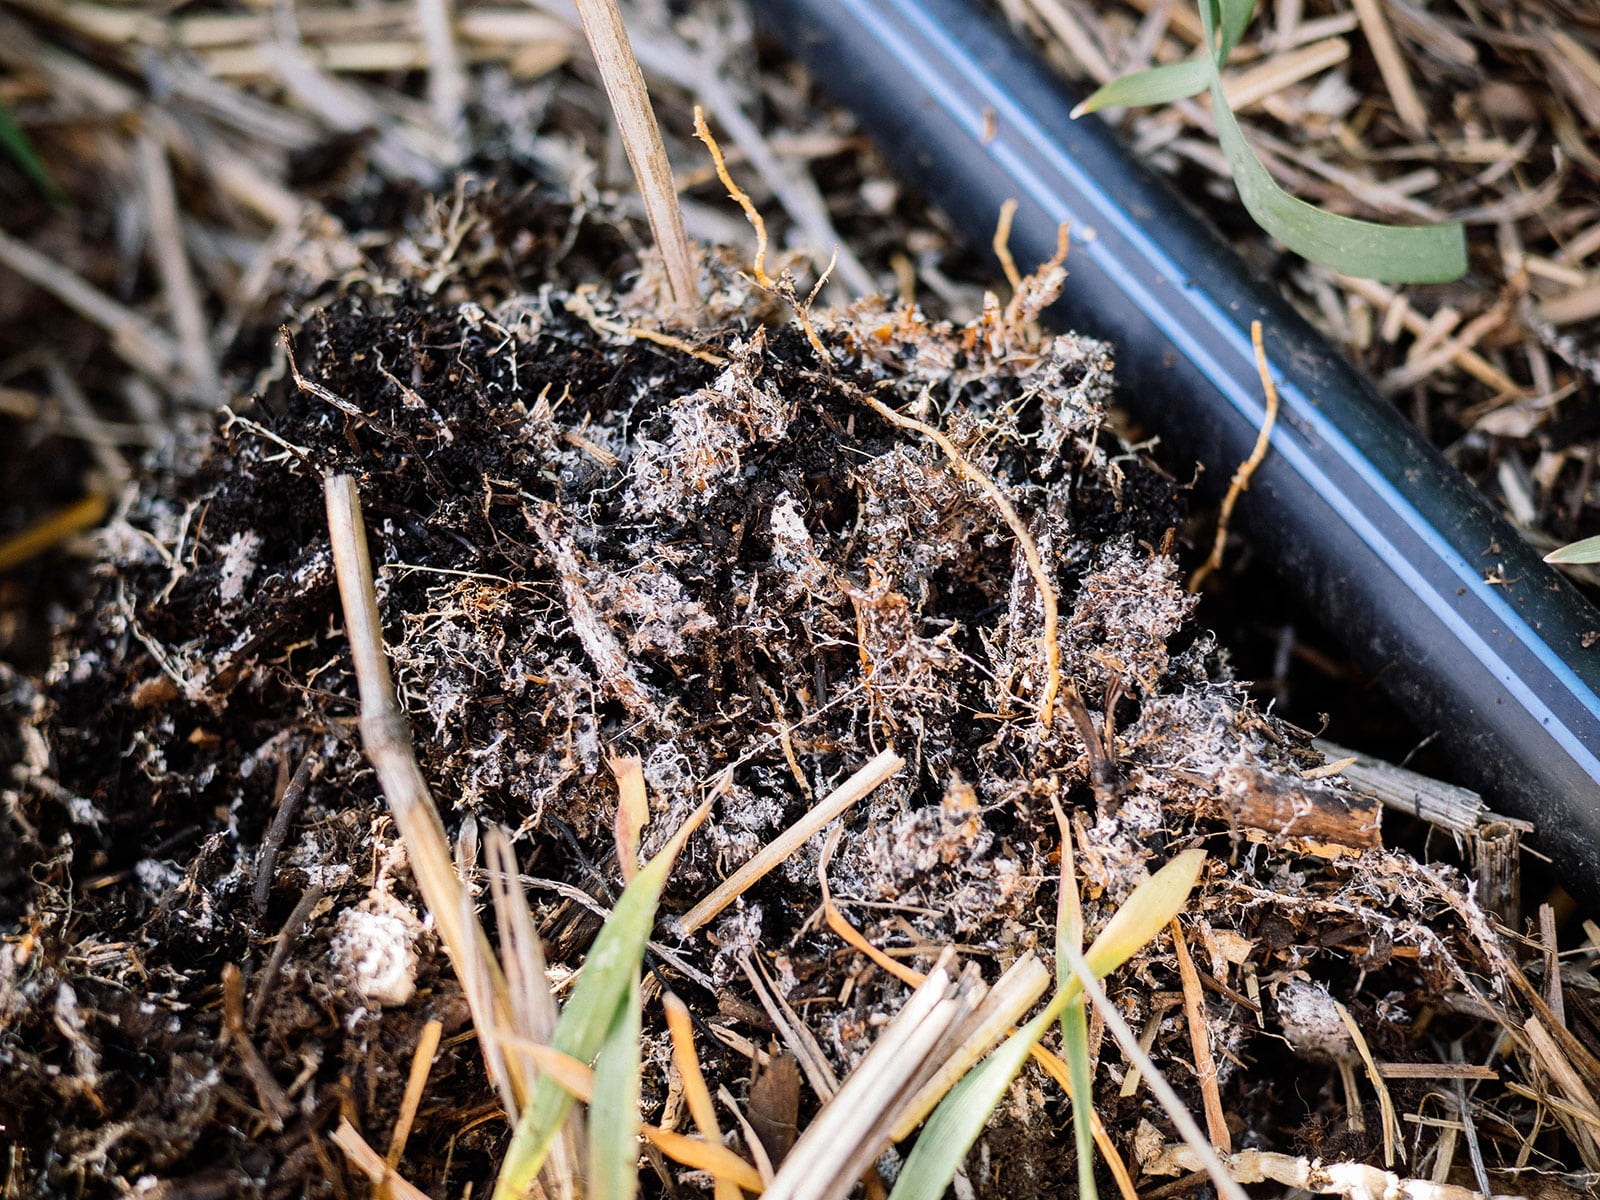 Close-up of a clump of soil with plant roots covered in mycorrhizal fungi